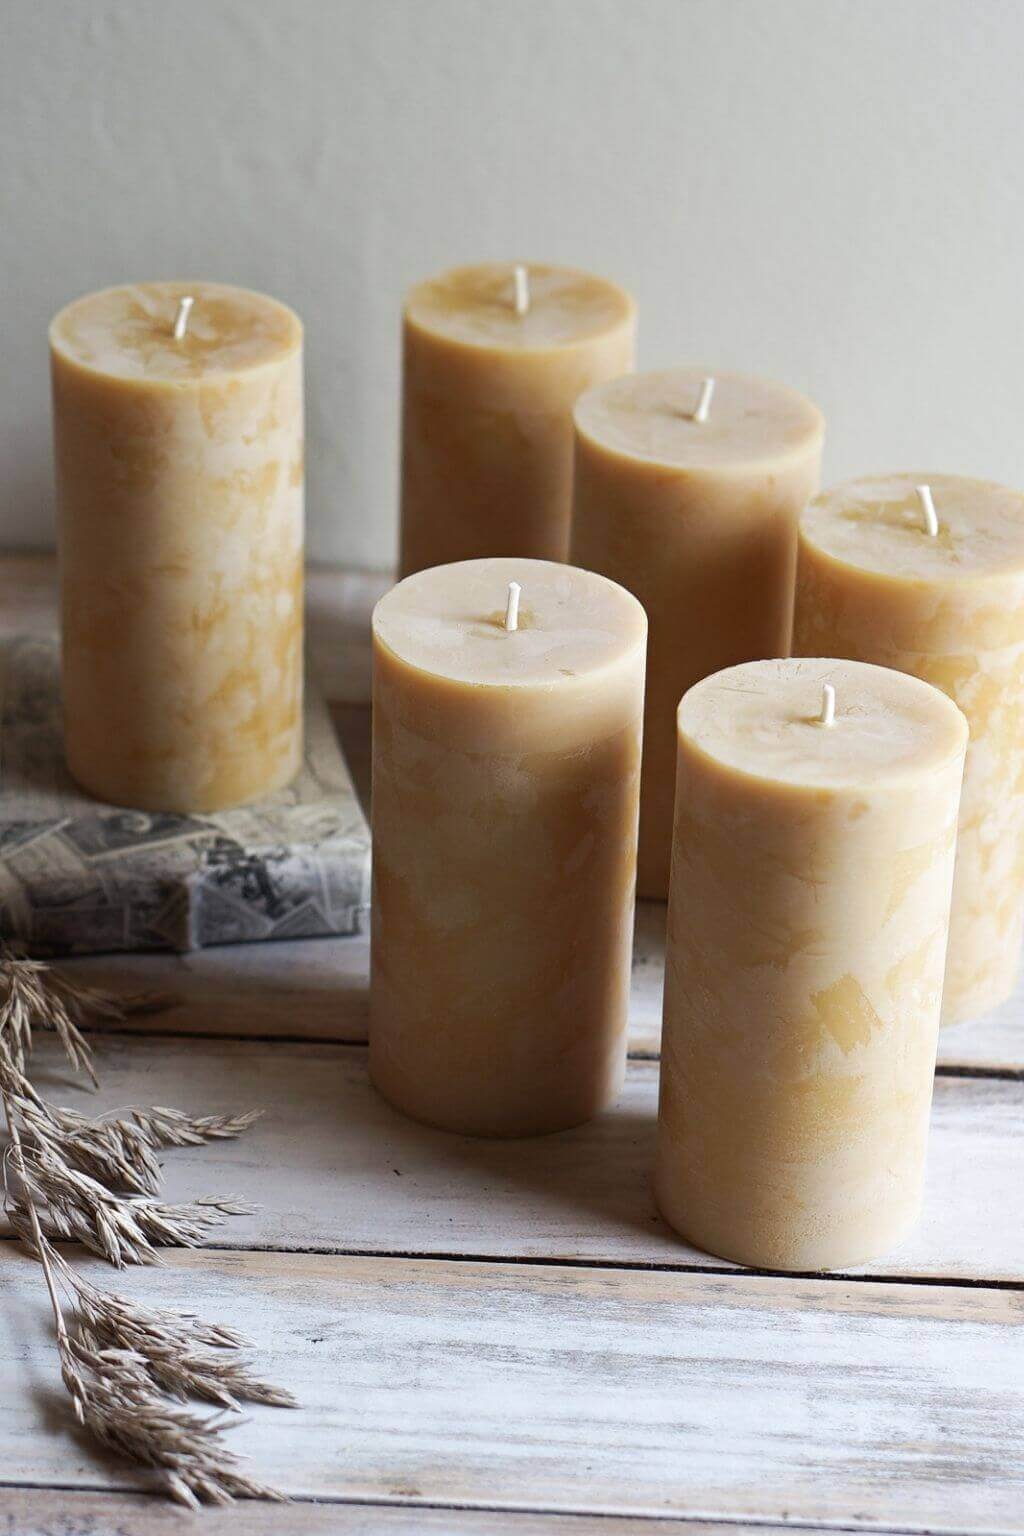 100% Natural Beeswax Candle, Handcrafted , Hand-Poured, Eco-Friendly,  Non-Toxic, Handmade Natural Beeswax